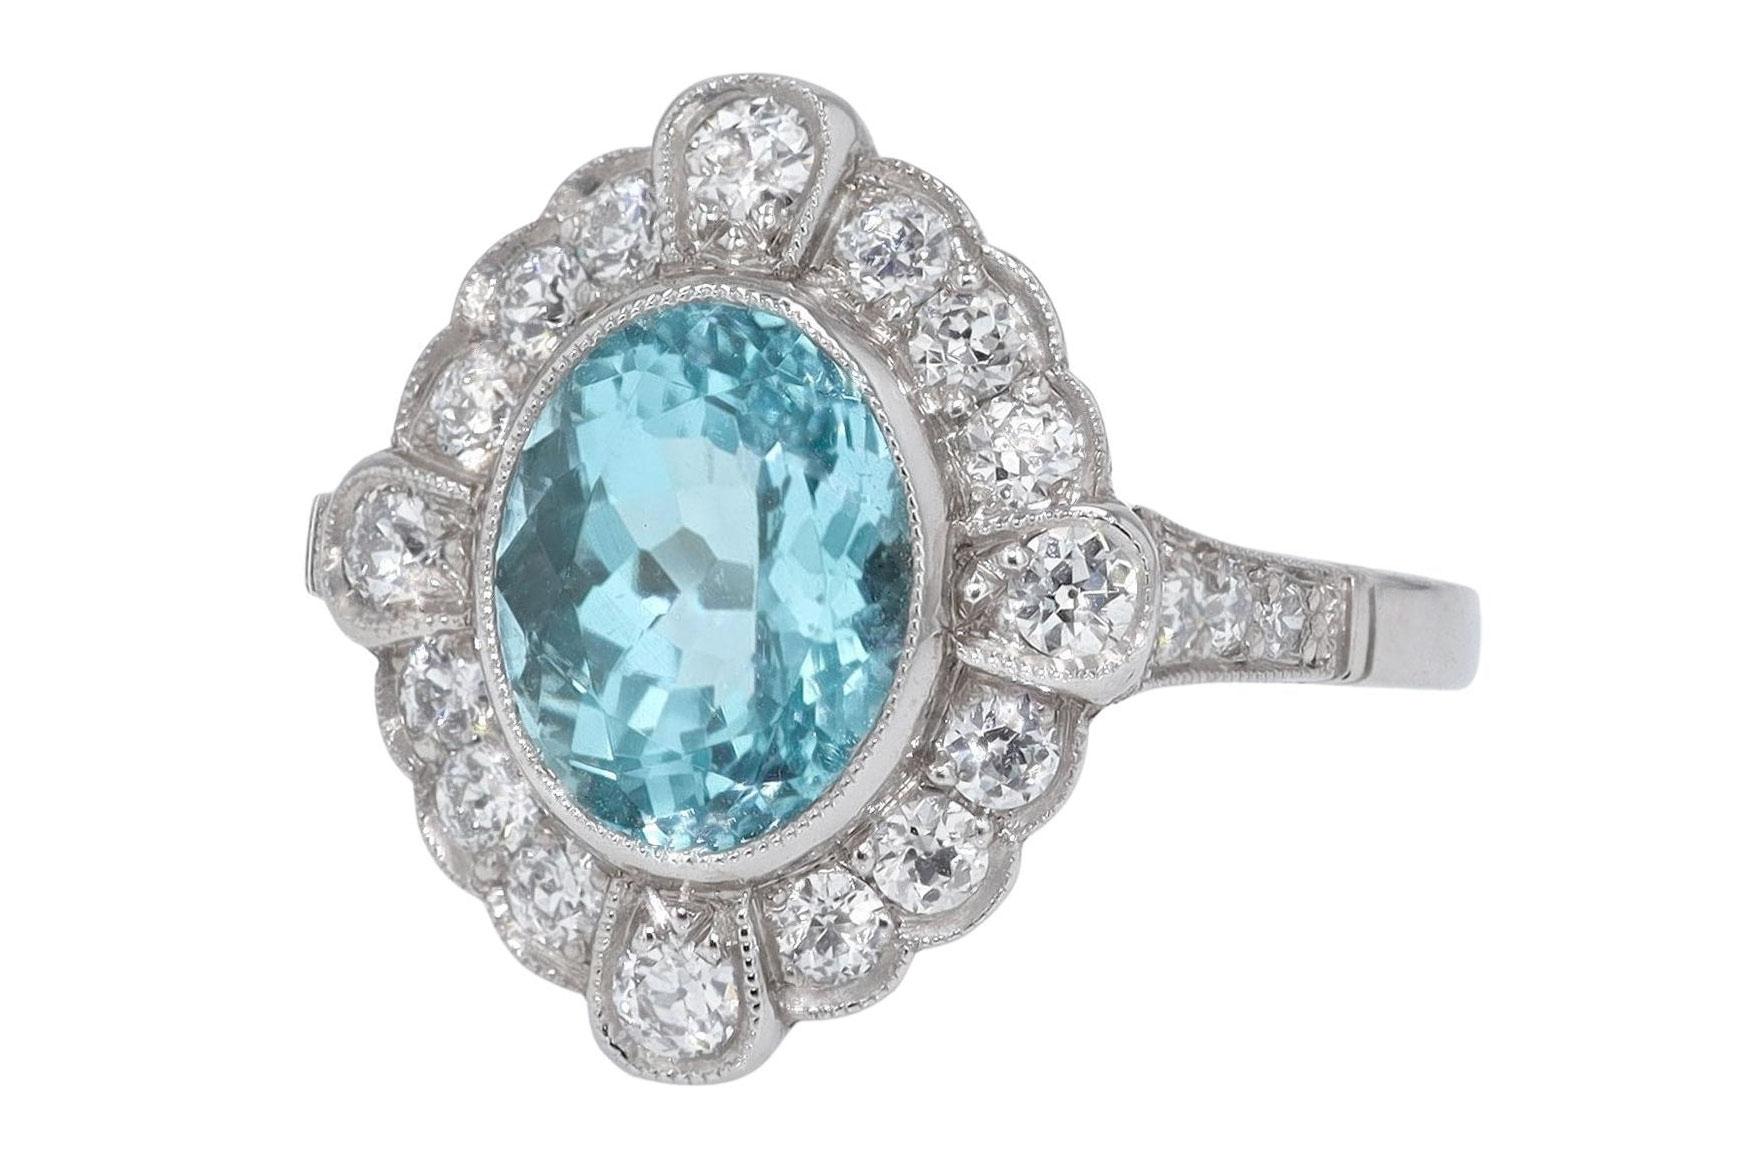 Oval Cut GIA Certified 2.76 Carat Paraiba Tourmaline Engagement Ring For Sale